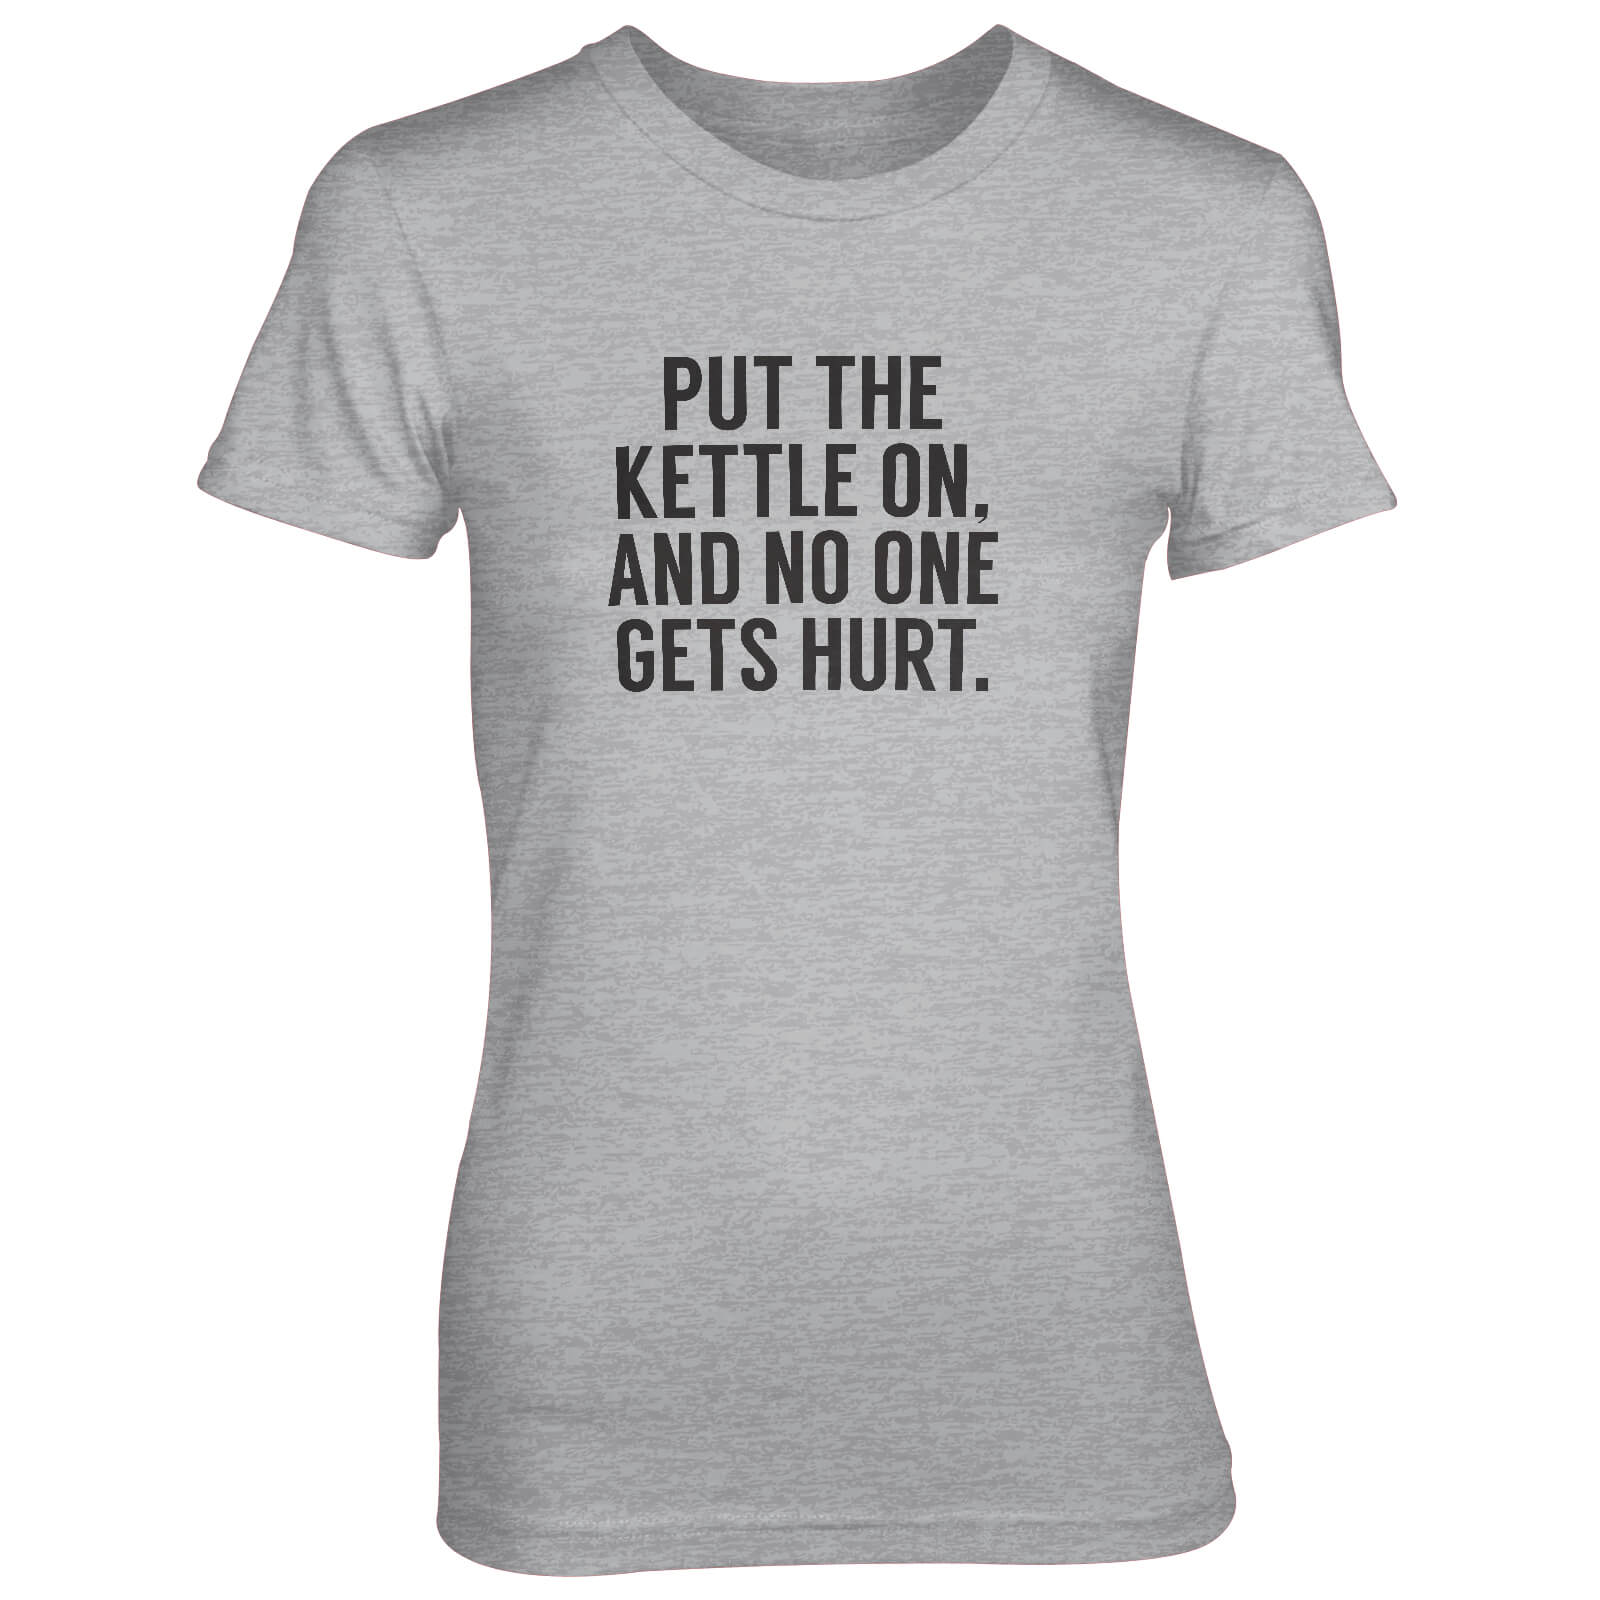 Put The Kettle On And No One Gets Hurt Women's Grey T-Shirt - S - Grey